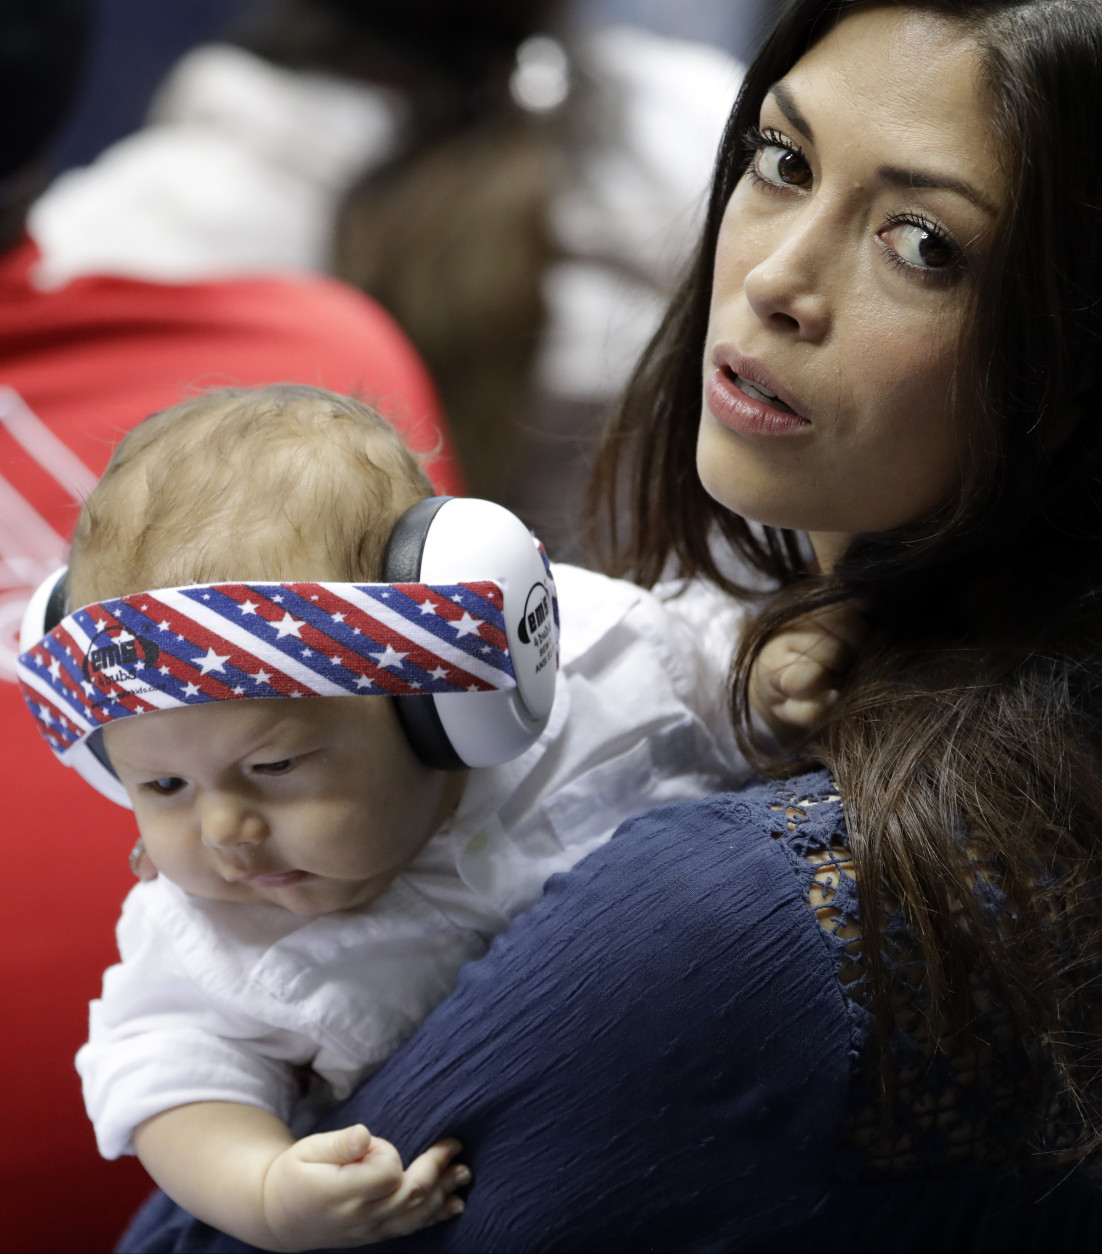 Nicole Johnson, fiance of United States' Michael Phelps, holds their baby Boomer during the swimming competitions at the 2016 Summer Olympics, Thursday, Aug. 11, 2016, in Rio de Janeiro, Brazil. (AP Photo/Natacha Pisarenko)